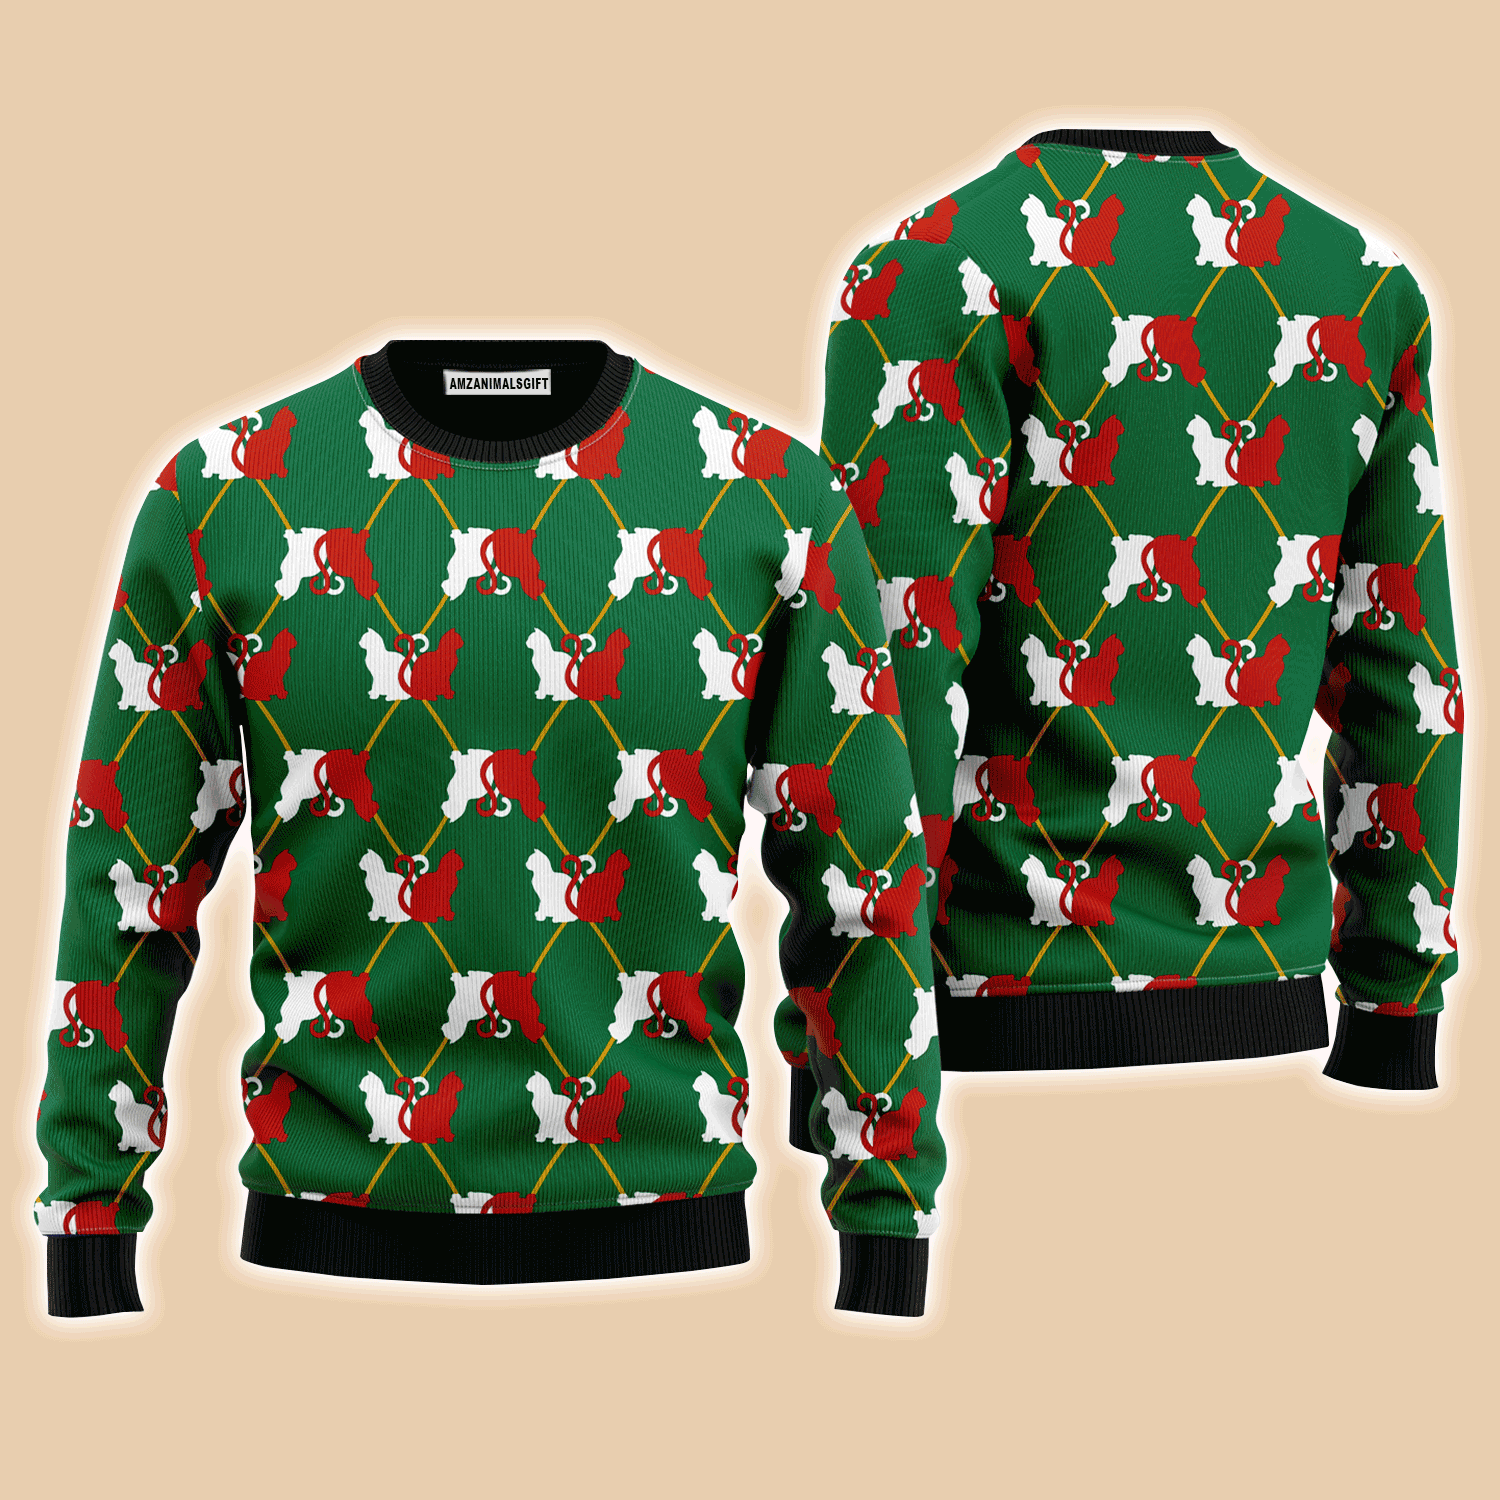 Cat Silhouettes Sweater - Cat Silhouettes Green Argyle Ugly Christmas Sweater For Men & Women - Perfect Outfit For Christmas New Year Autumn Winter